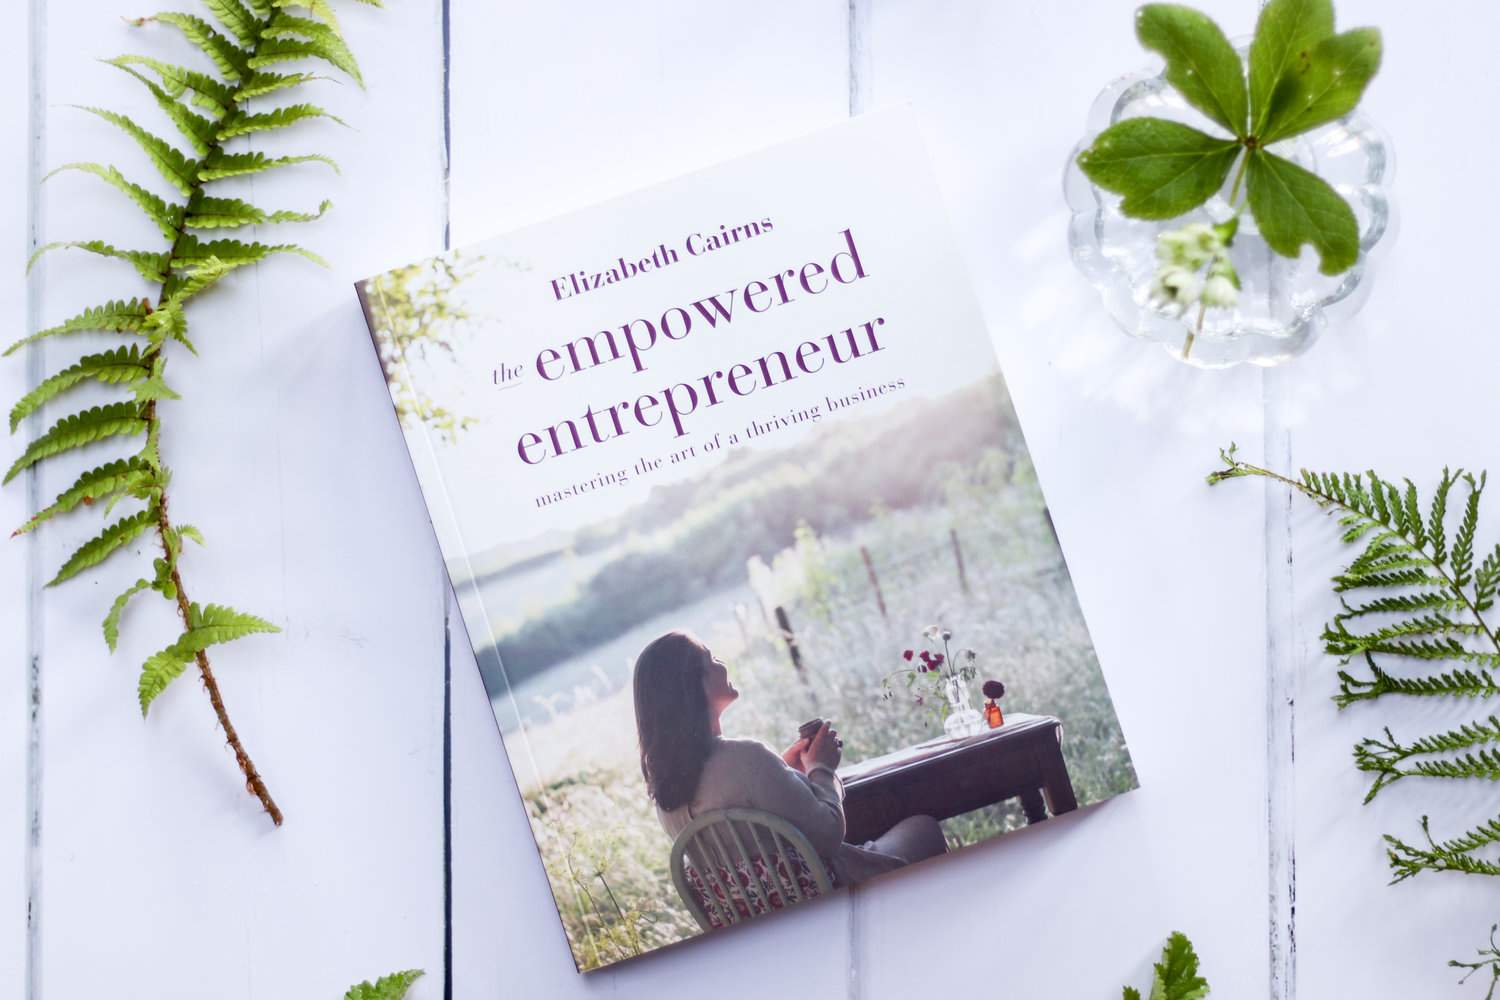 The Empowered Entrepreneur- Interview with Elizabeth Cairns